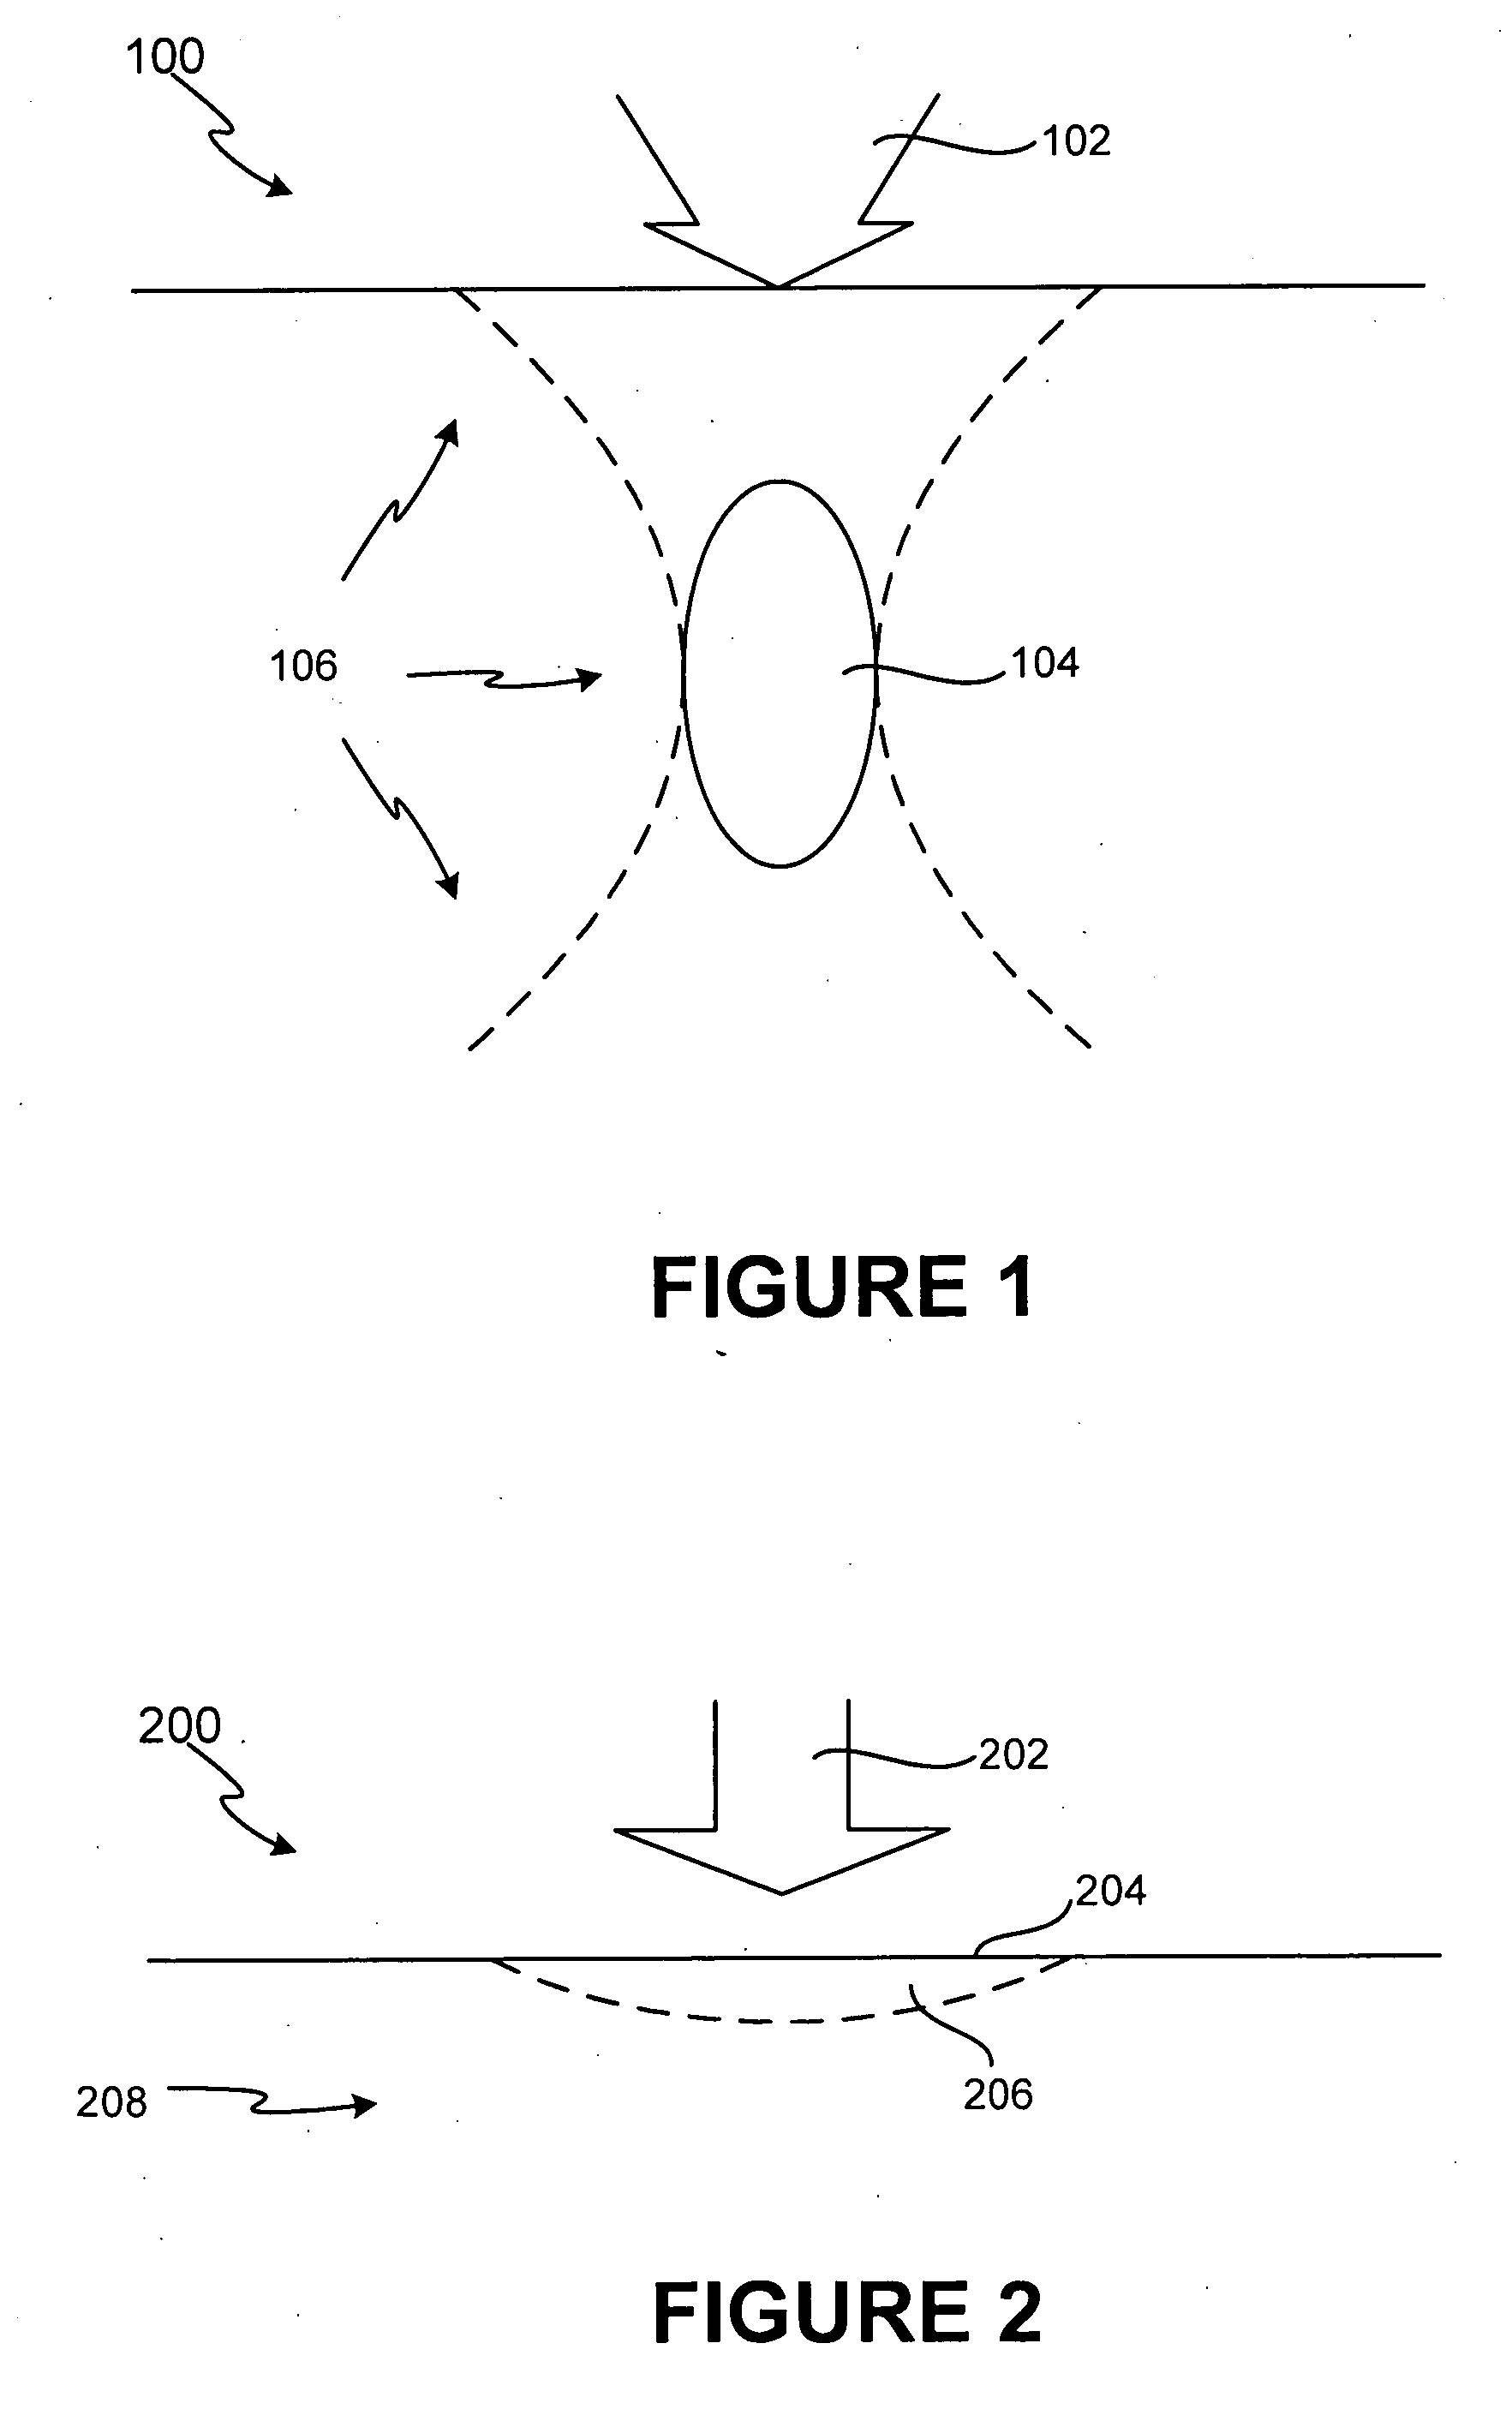 Method and system for ultra-high frequency ultrasound treatment